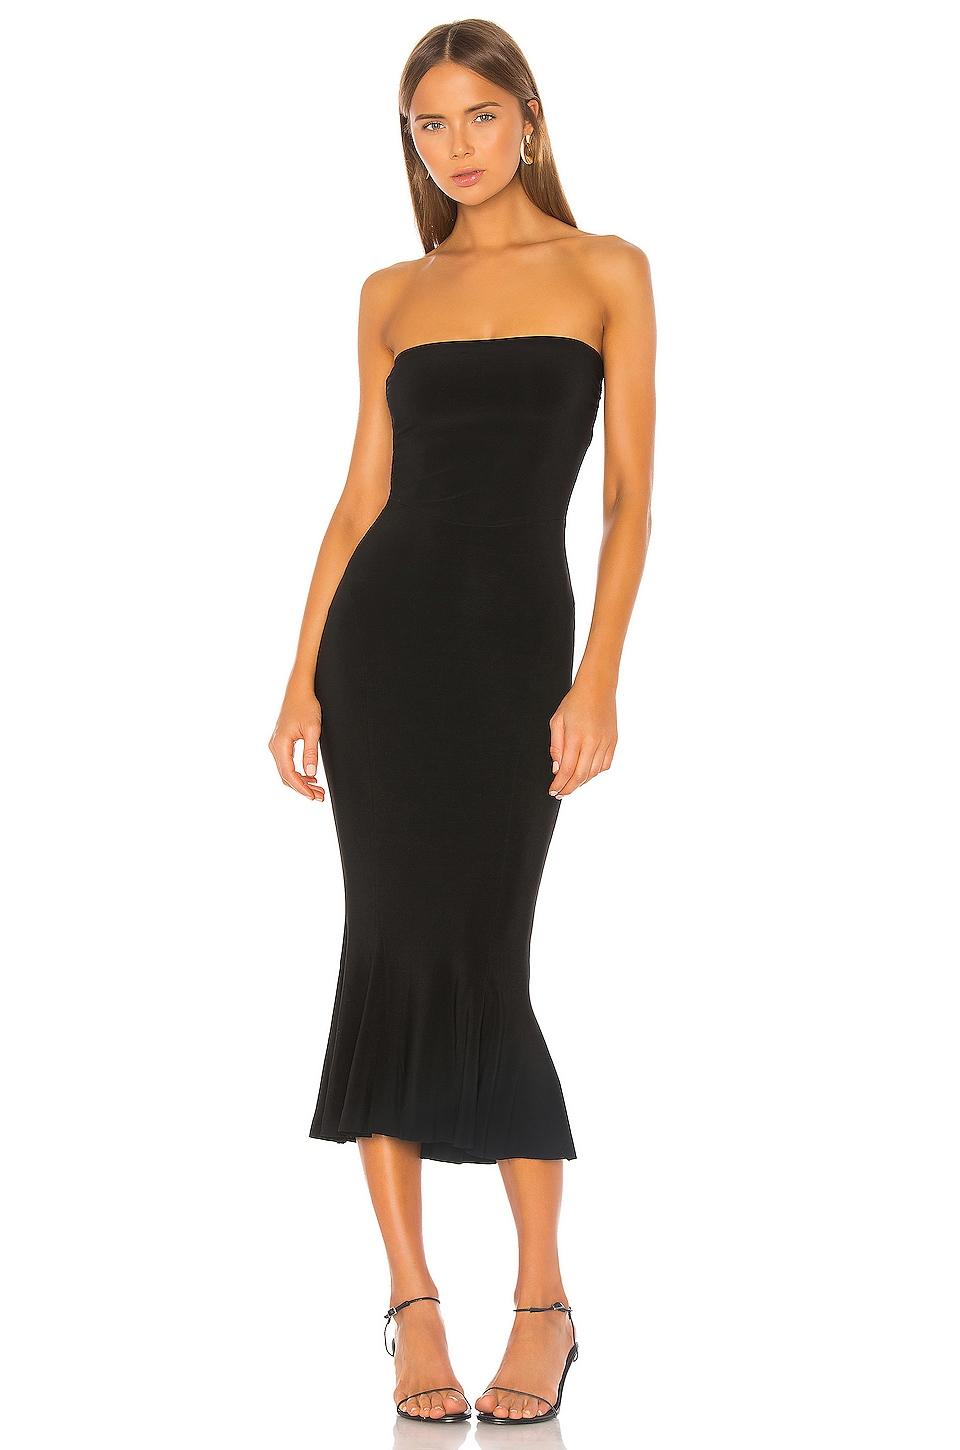 Norma Kamali Synthetic Strapless Fishtail Dress in Black - Lyst